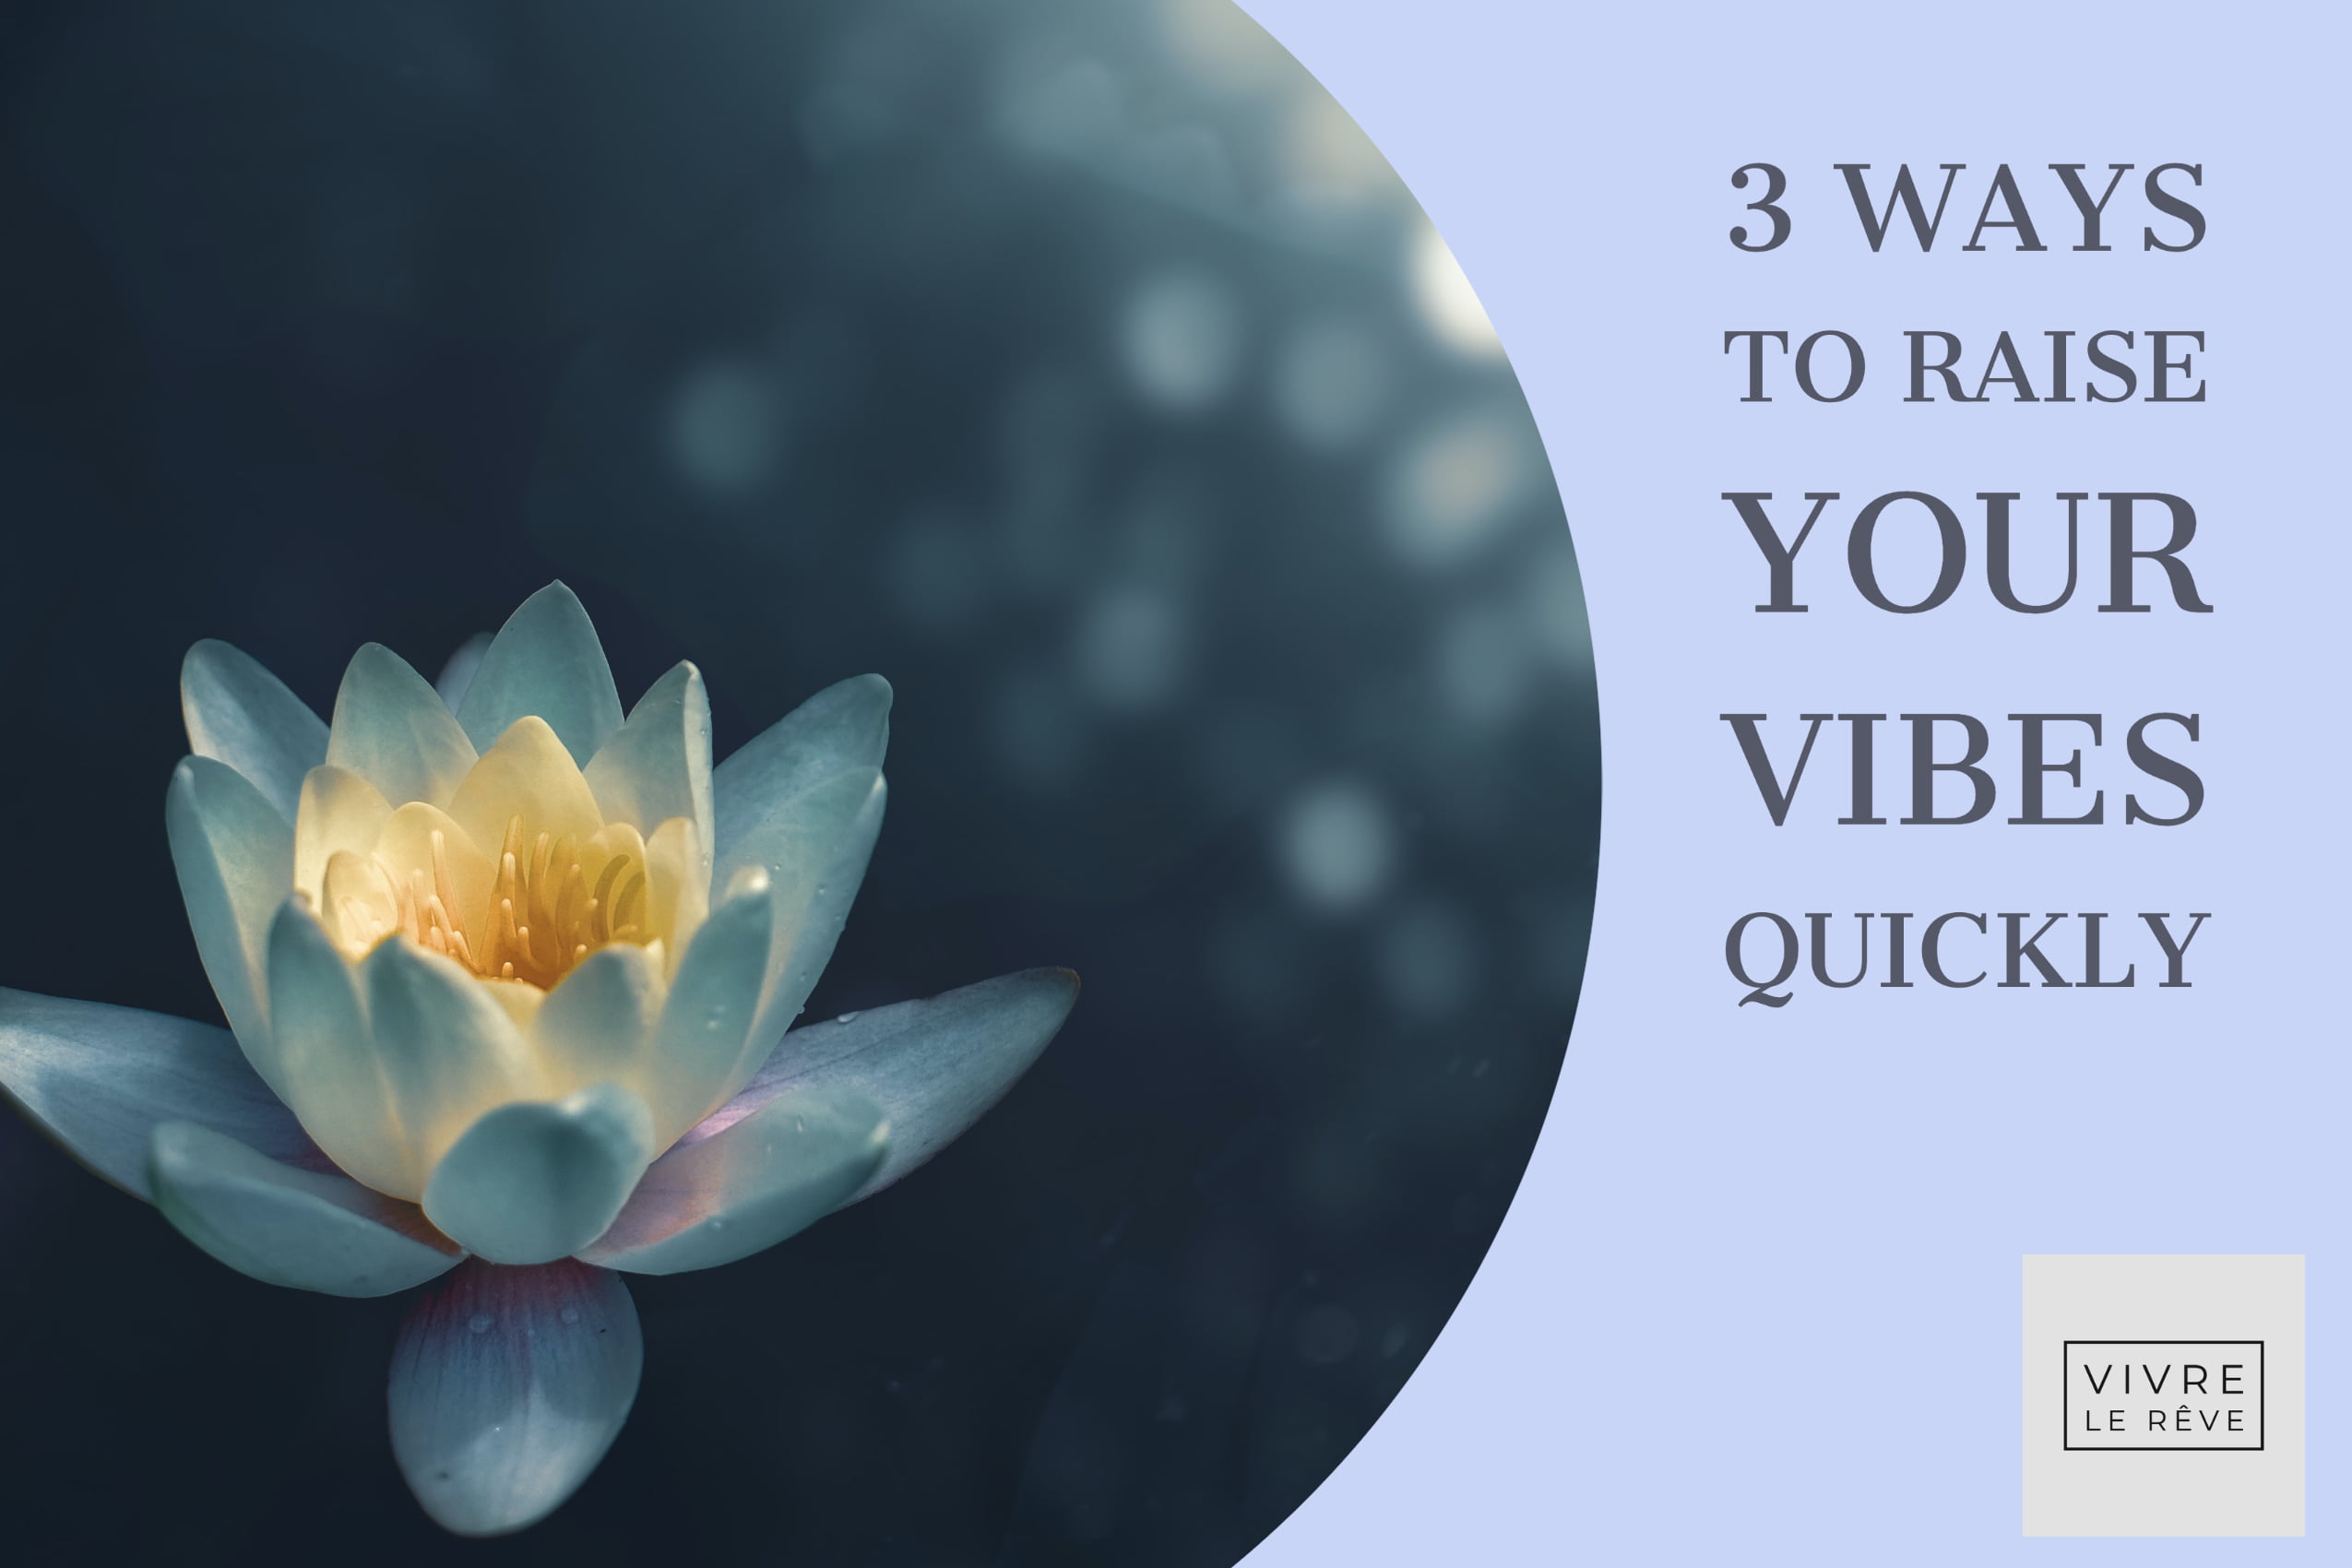 3 Ways to Raise Your Vibes Quickly